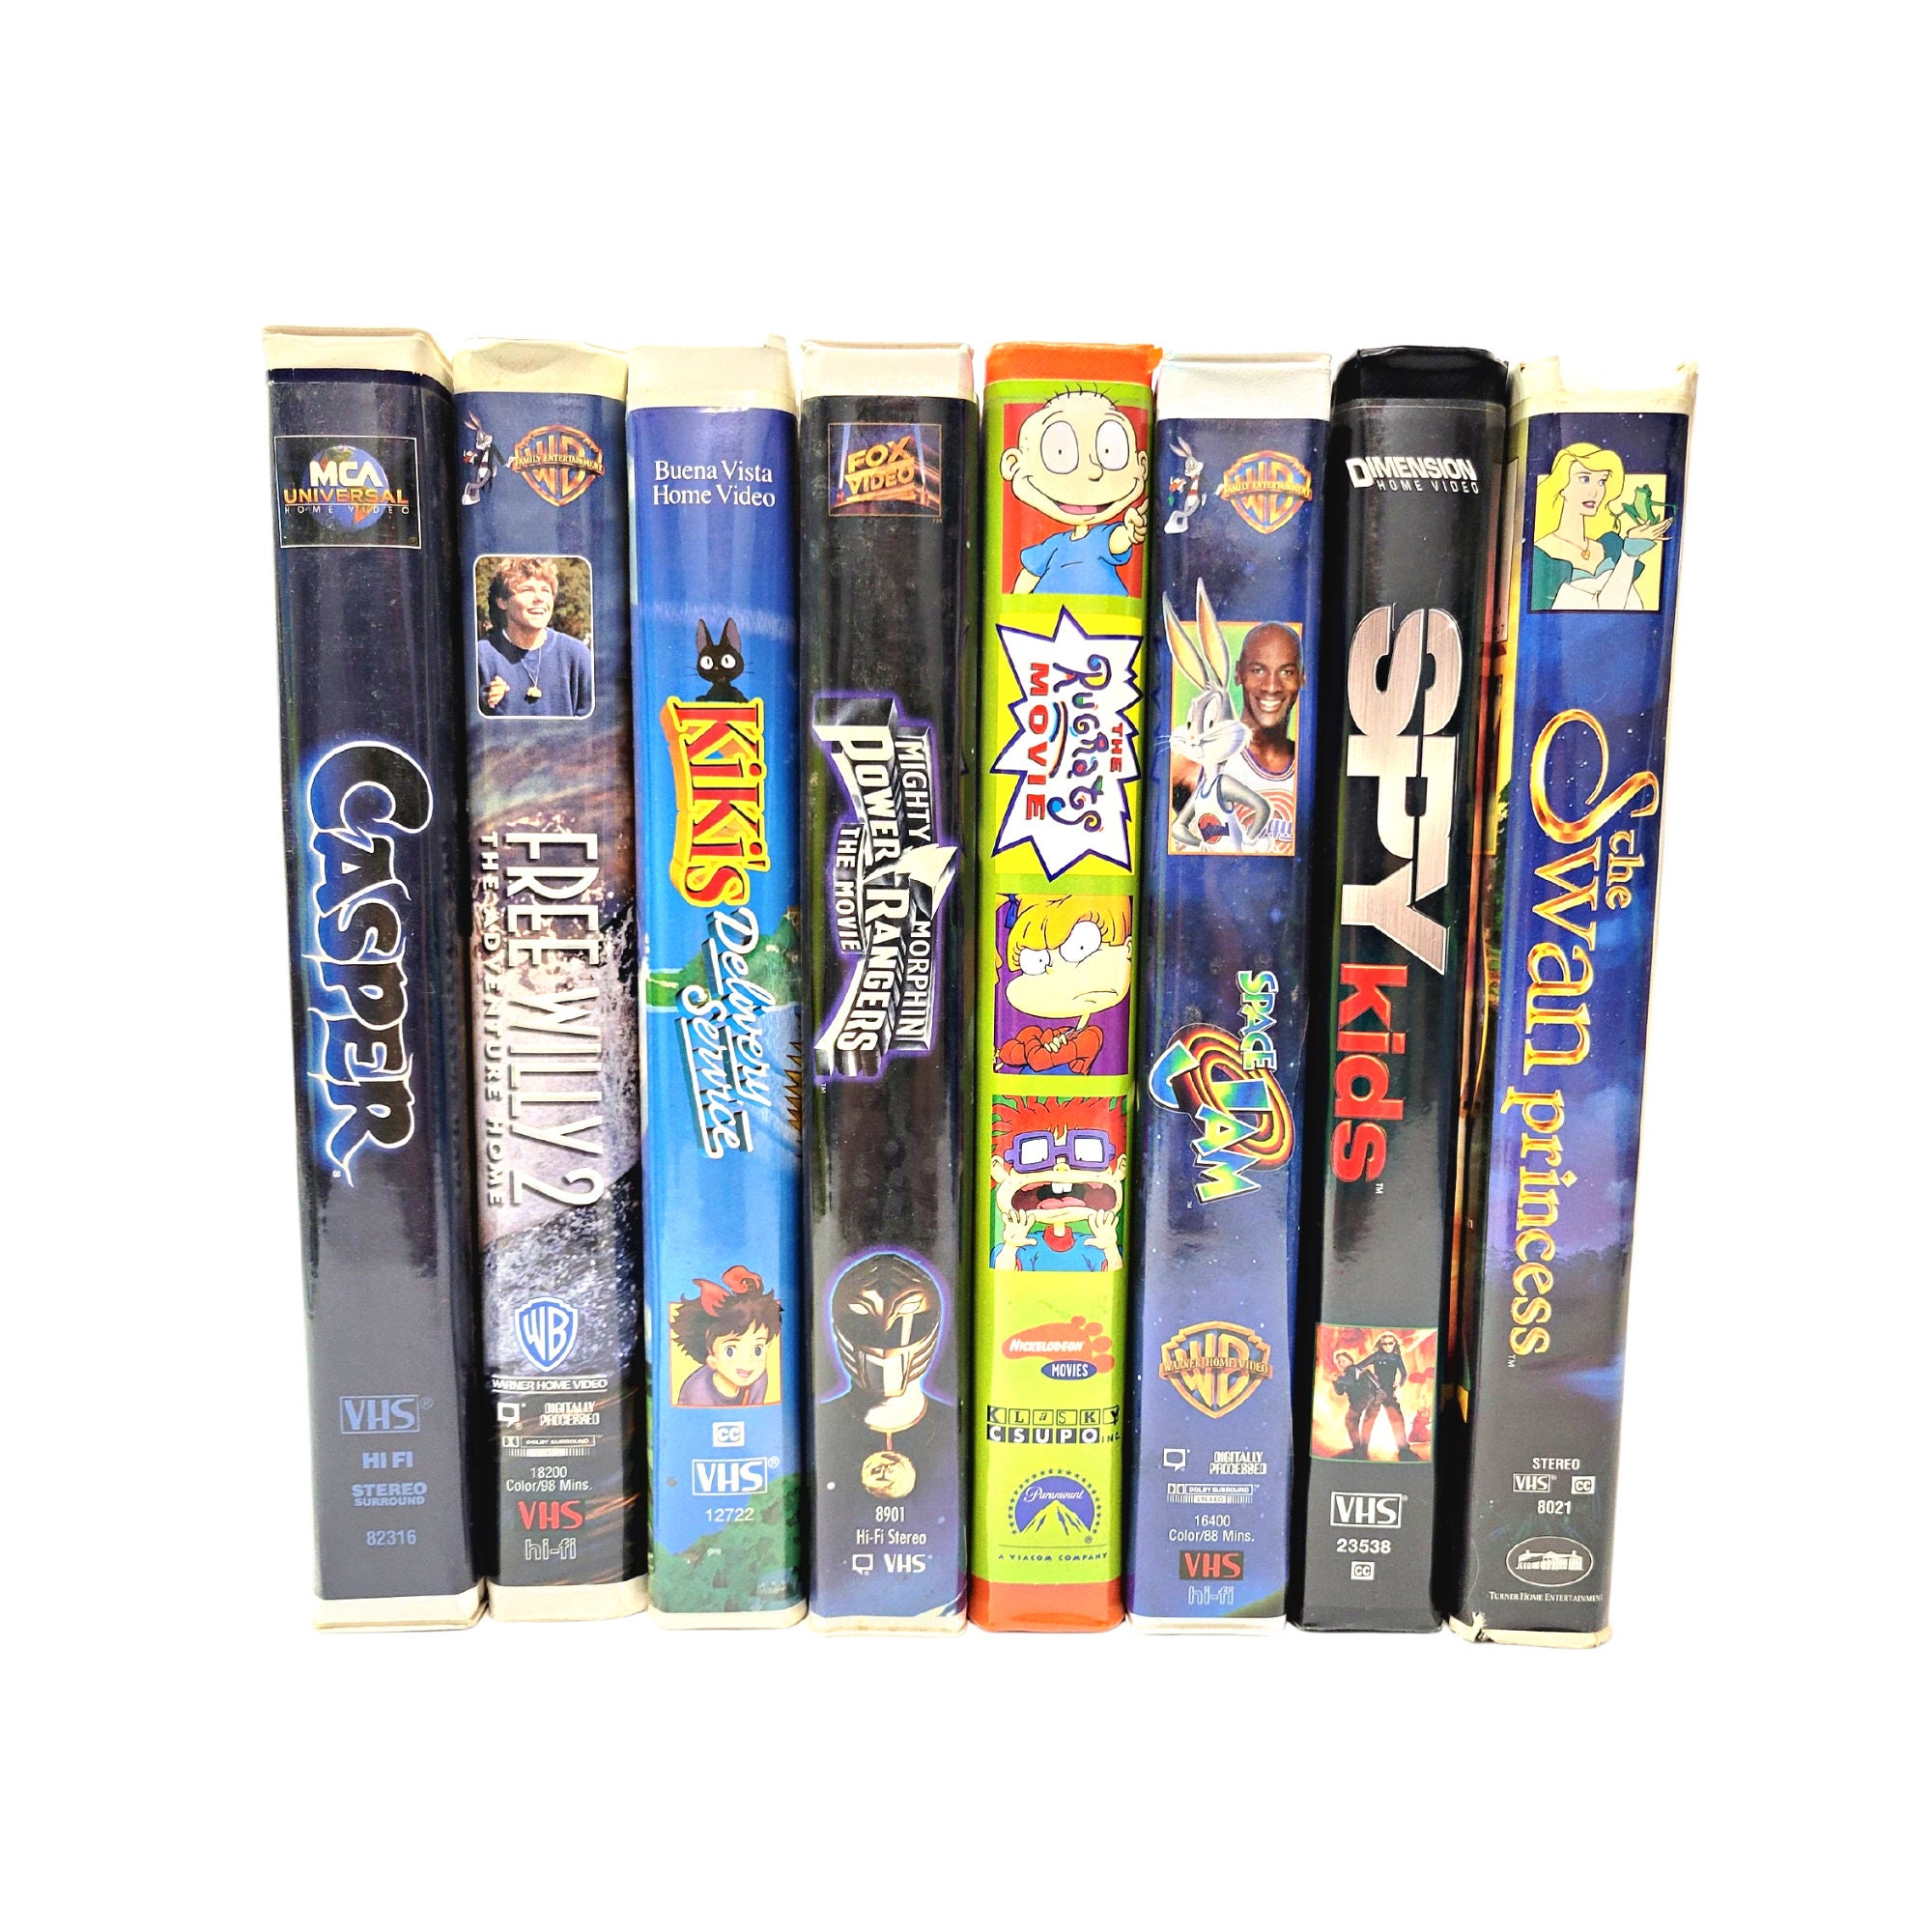 VHS Family Movies Casper Free Willy 2 Kikis Delivery - Etsy